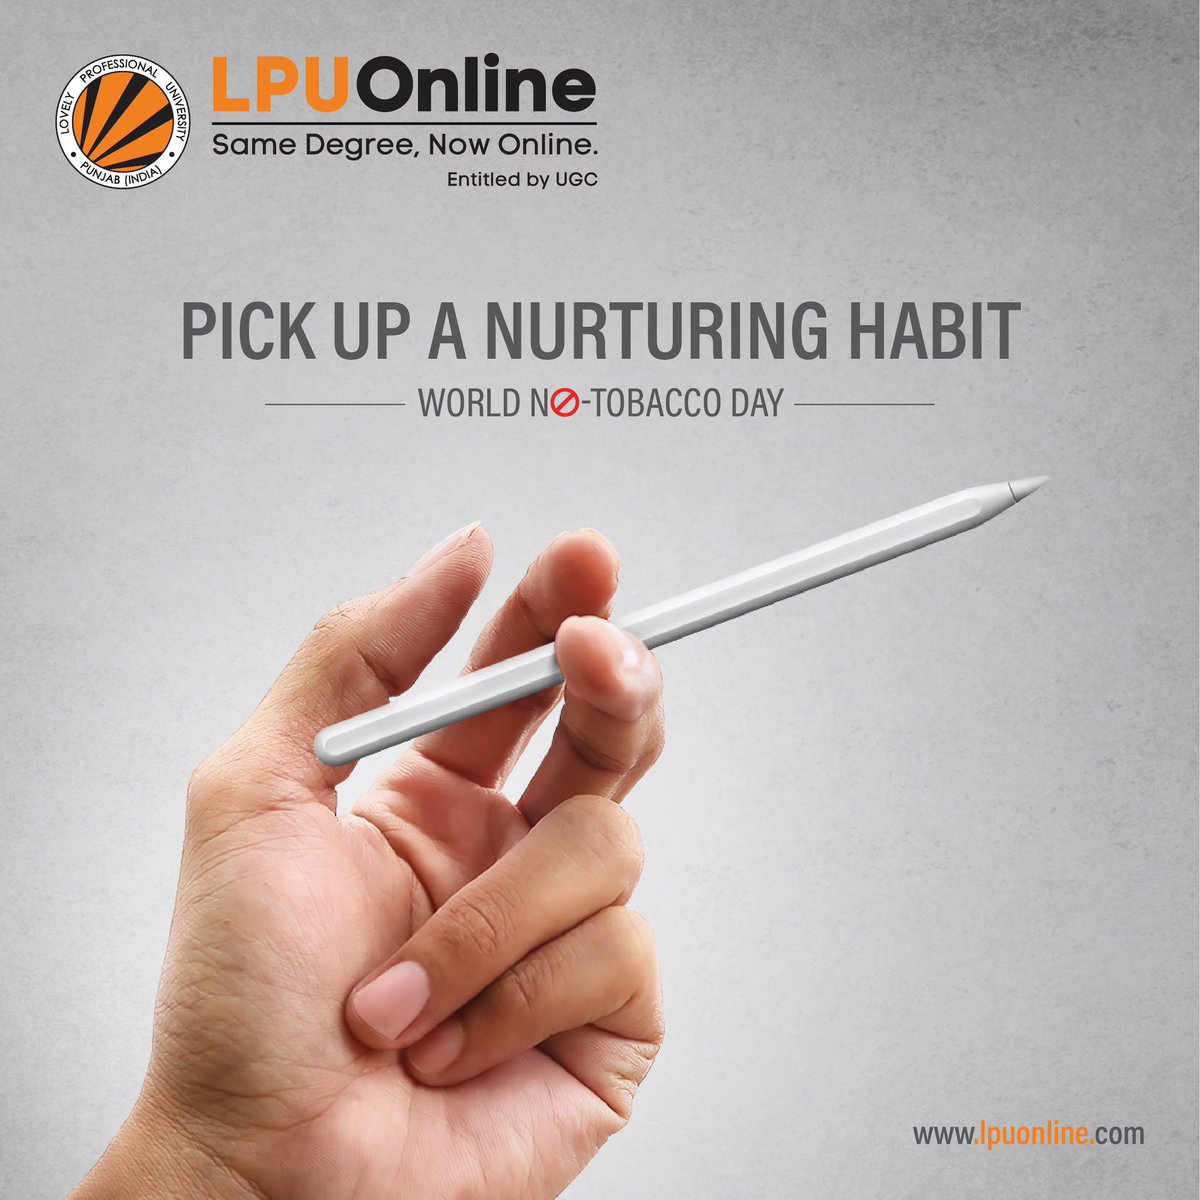 This World No-Tobacco Day (31st May 2023), set yourself apart. ​
Take home a degree instead of a bad habit. ​

Quit smoking today.

#Smoking #NoTobacco #NoTobaccoDay #QuitSmoking #QuitSmokingNow #Degree #PositiveHabits #LPUOnline